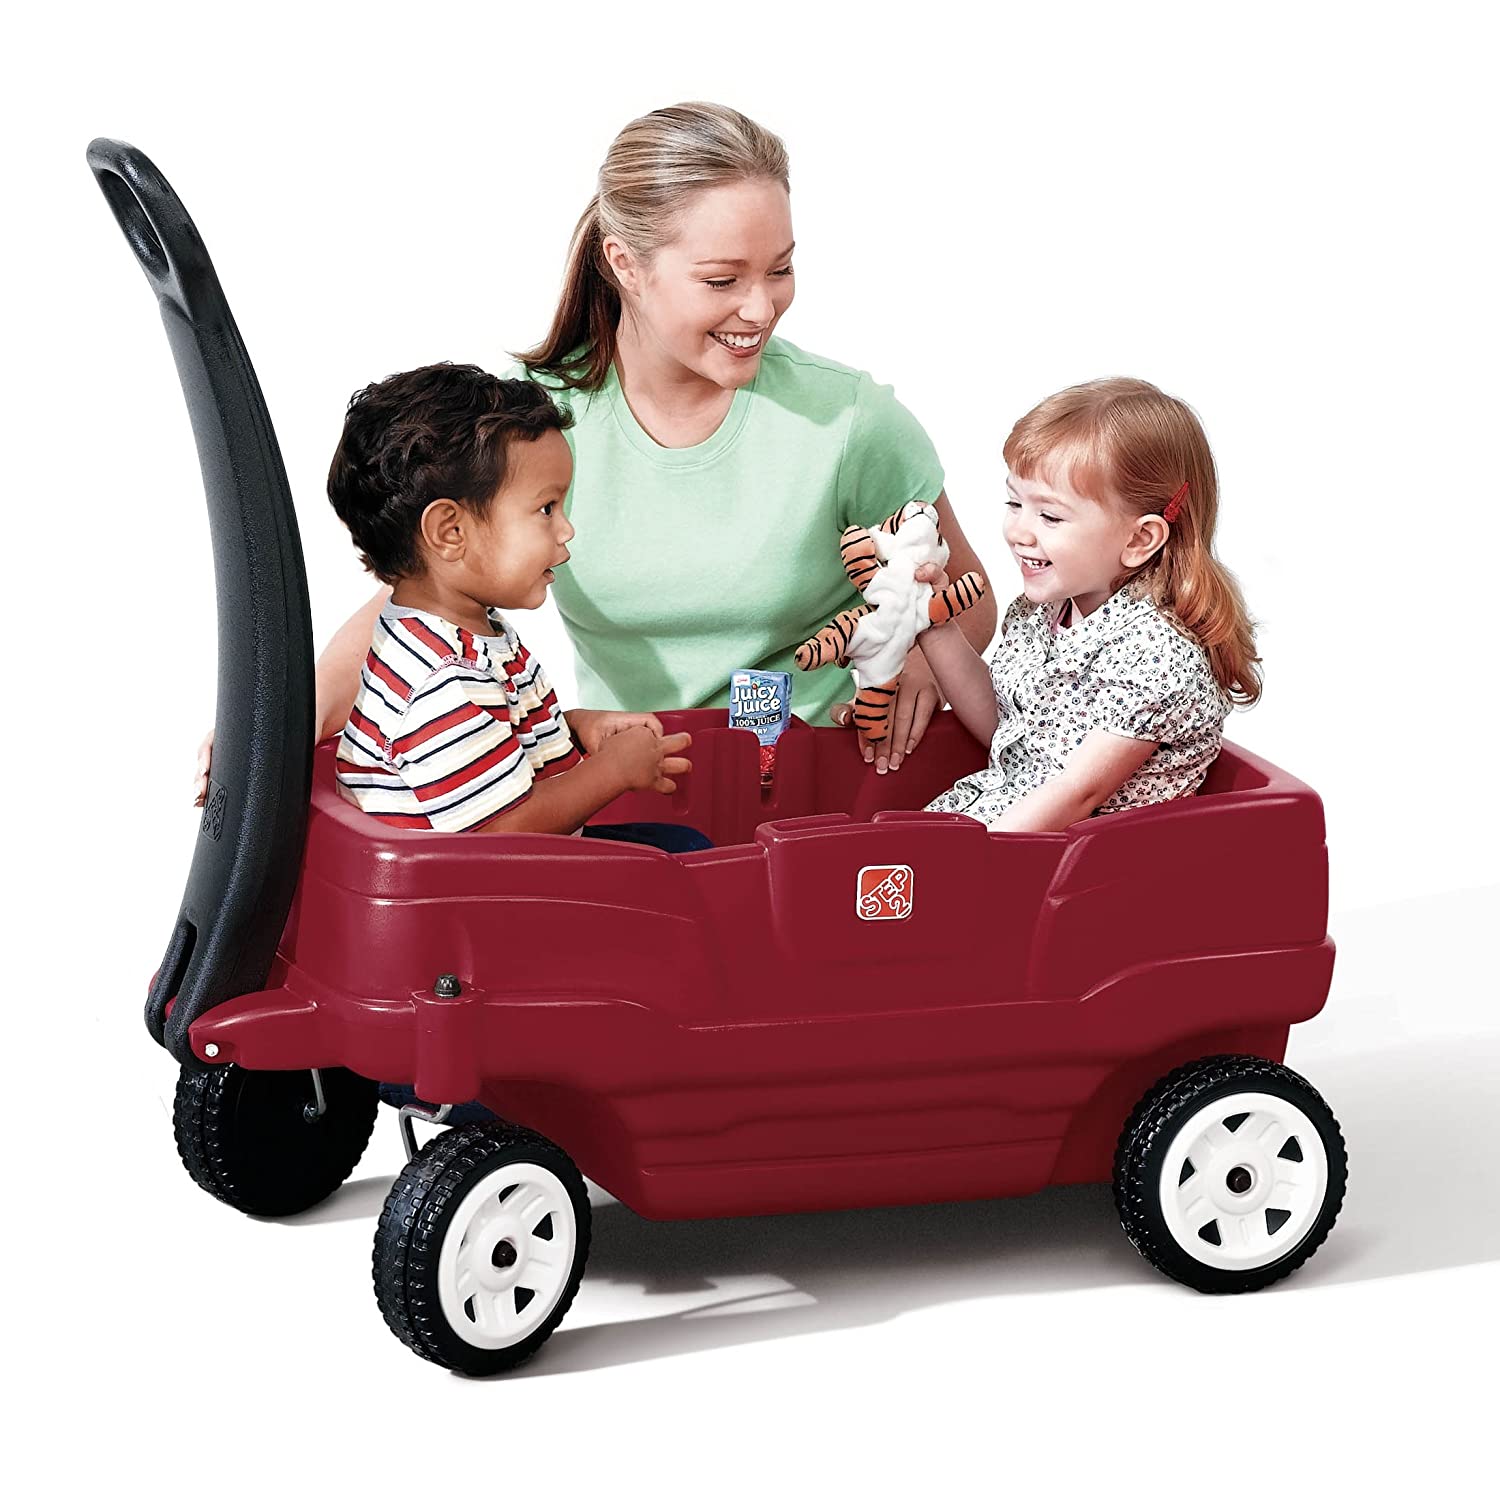 Top 10 Best Wagons for Kids Reviews in 2022 2